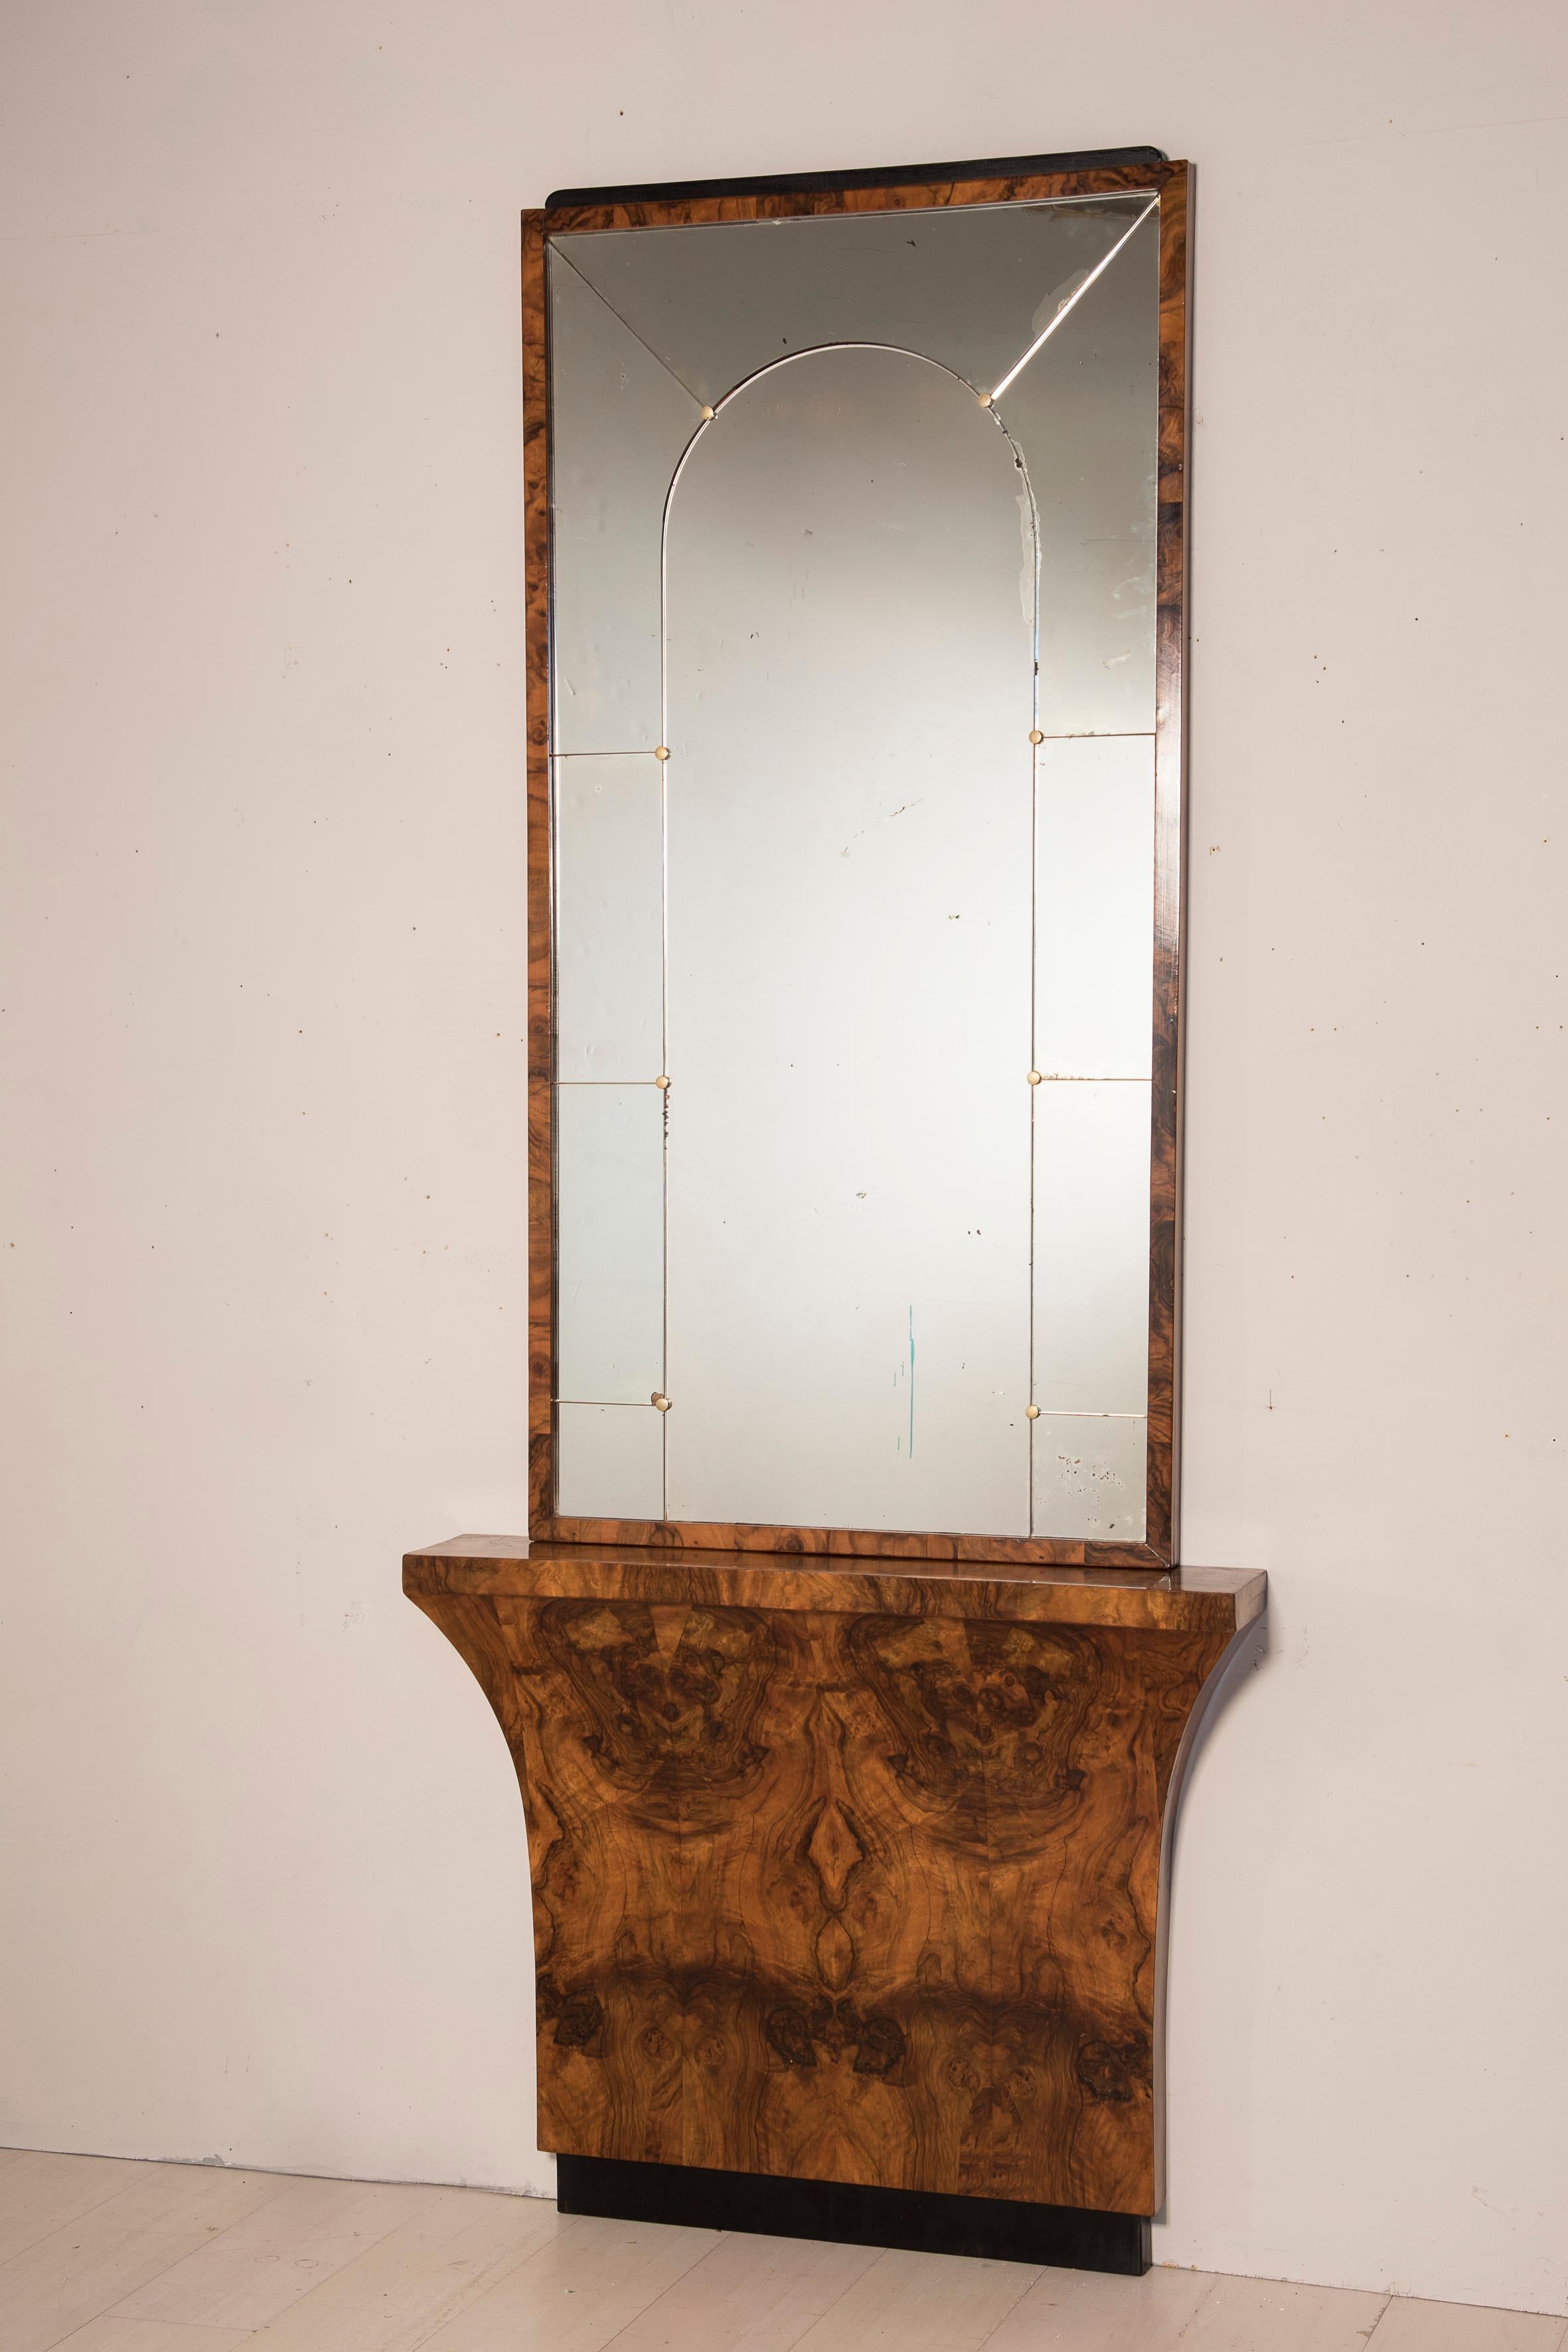 Art Deco 1930s veneered Mirrored Console Table. The base of the console table features a big veneer flame. The Mirror is paneled with brass studs.
Size of the base 100 x 18 h 82 cm - size of the mirror 157 x 80 cm.
Restored in conservative